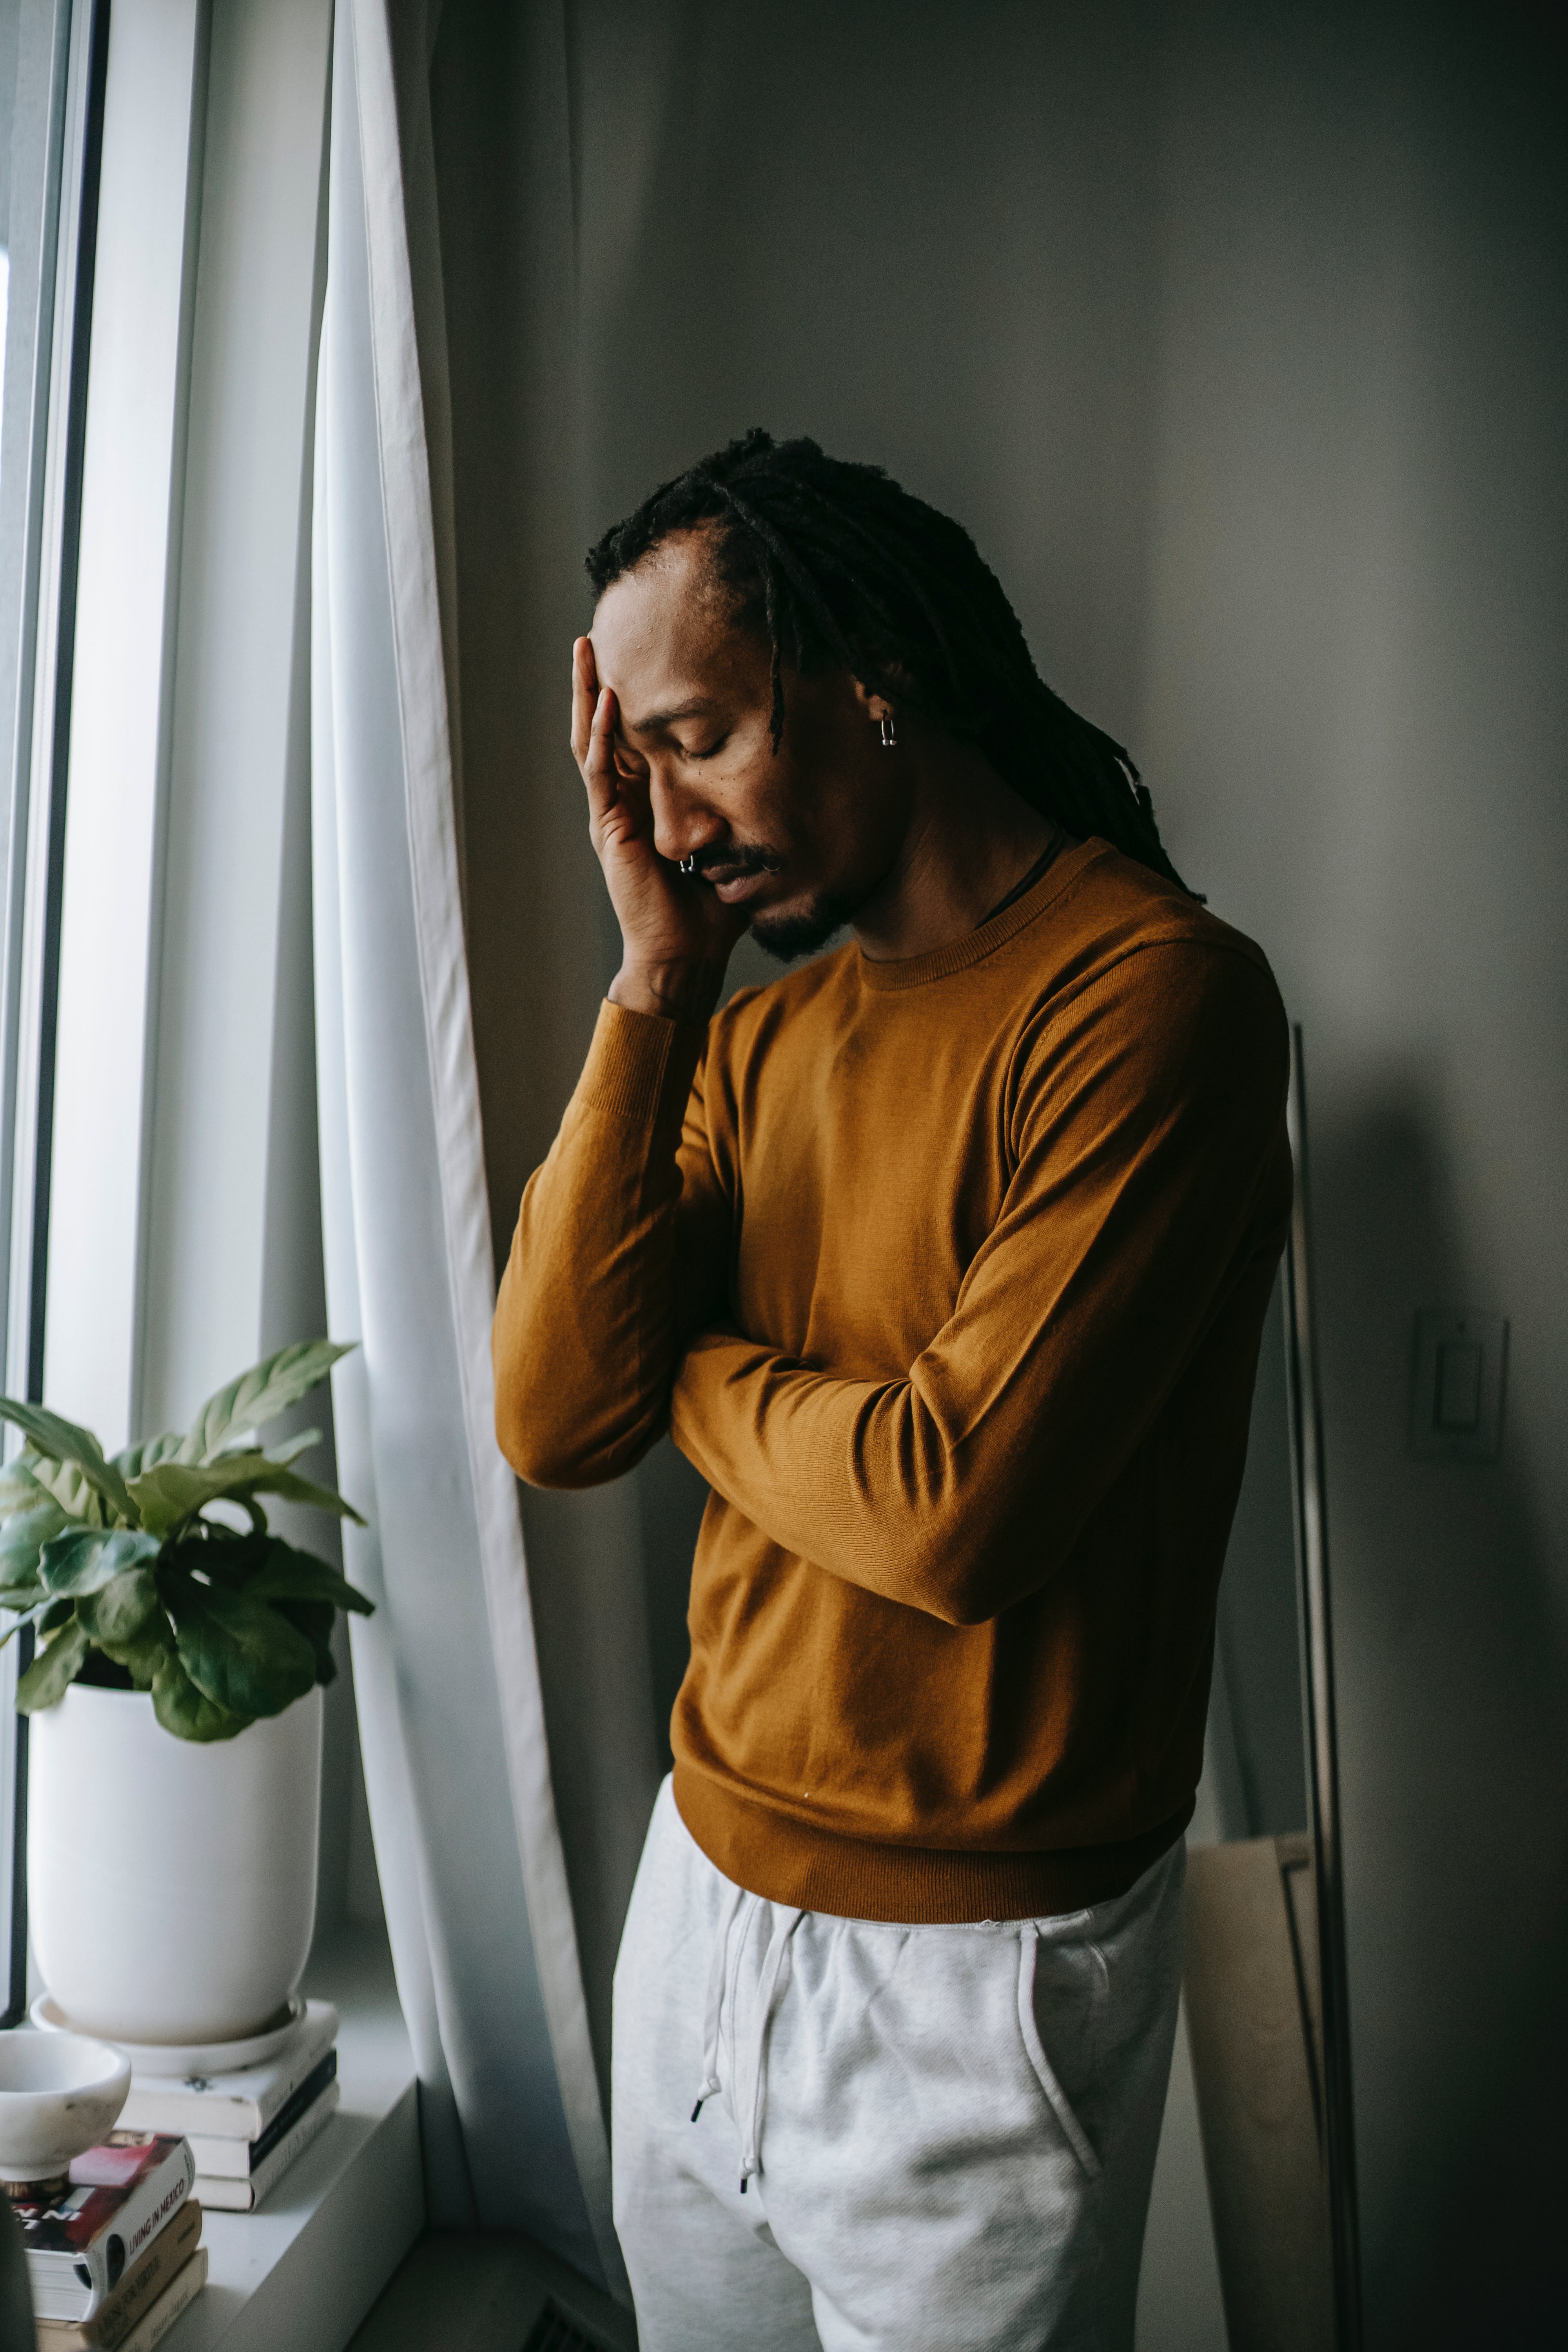 A frustrated man standing by a window with his hand against his head | Source: Pexels